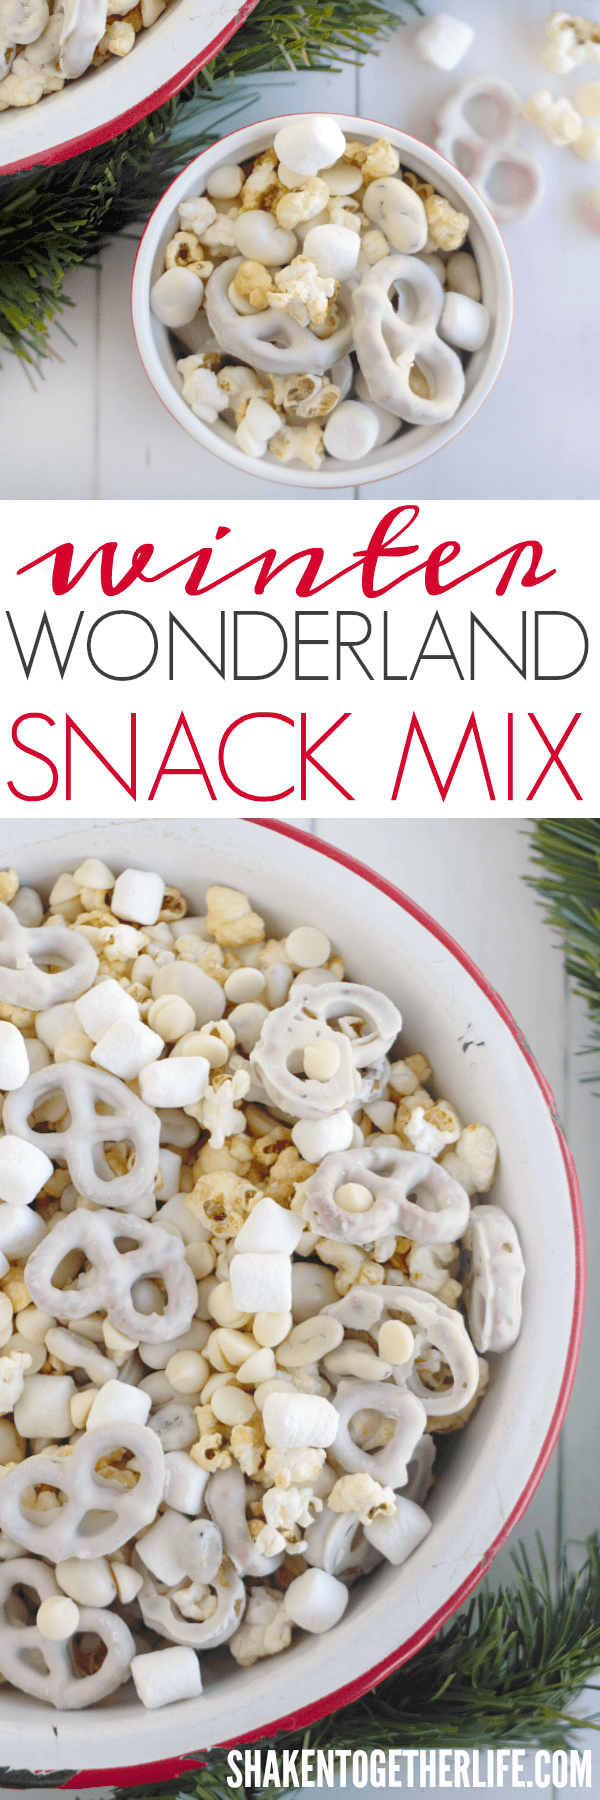 Winter Wonderland Snack Mix is filled with all snowy white sweet and salty tastes of the season!!